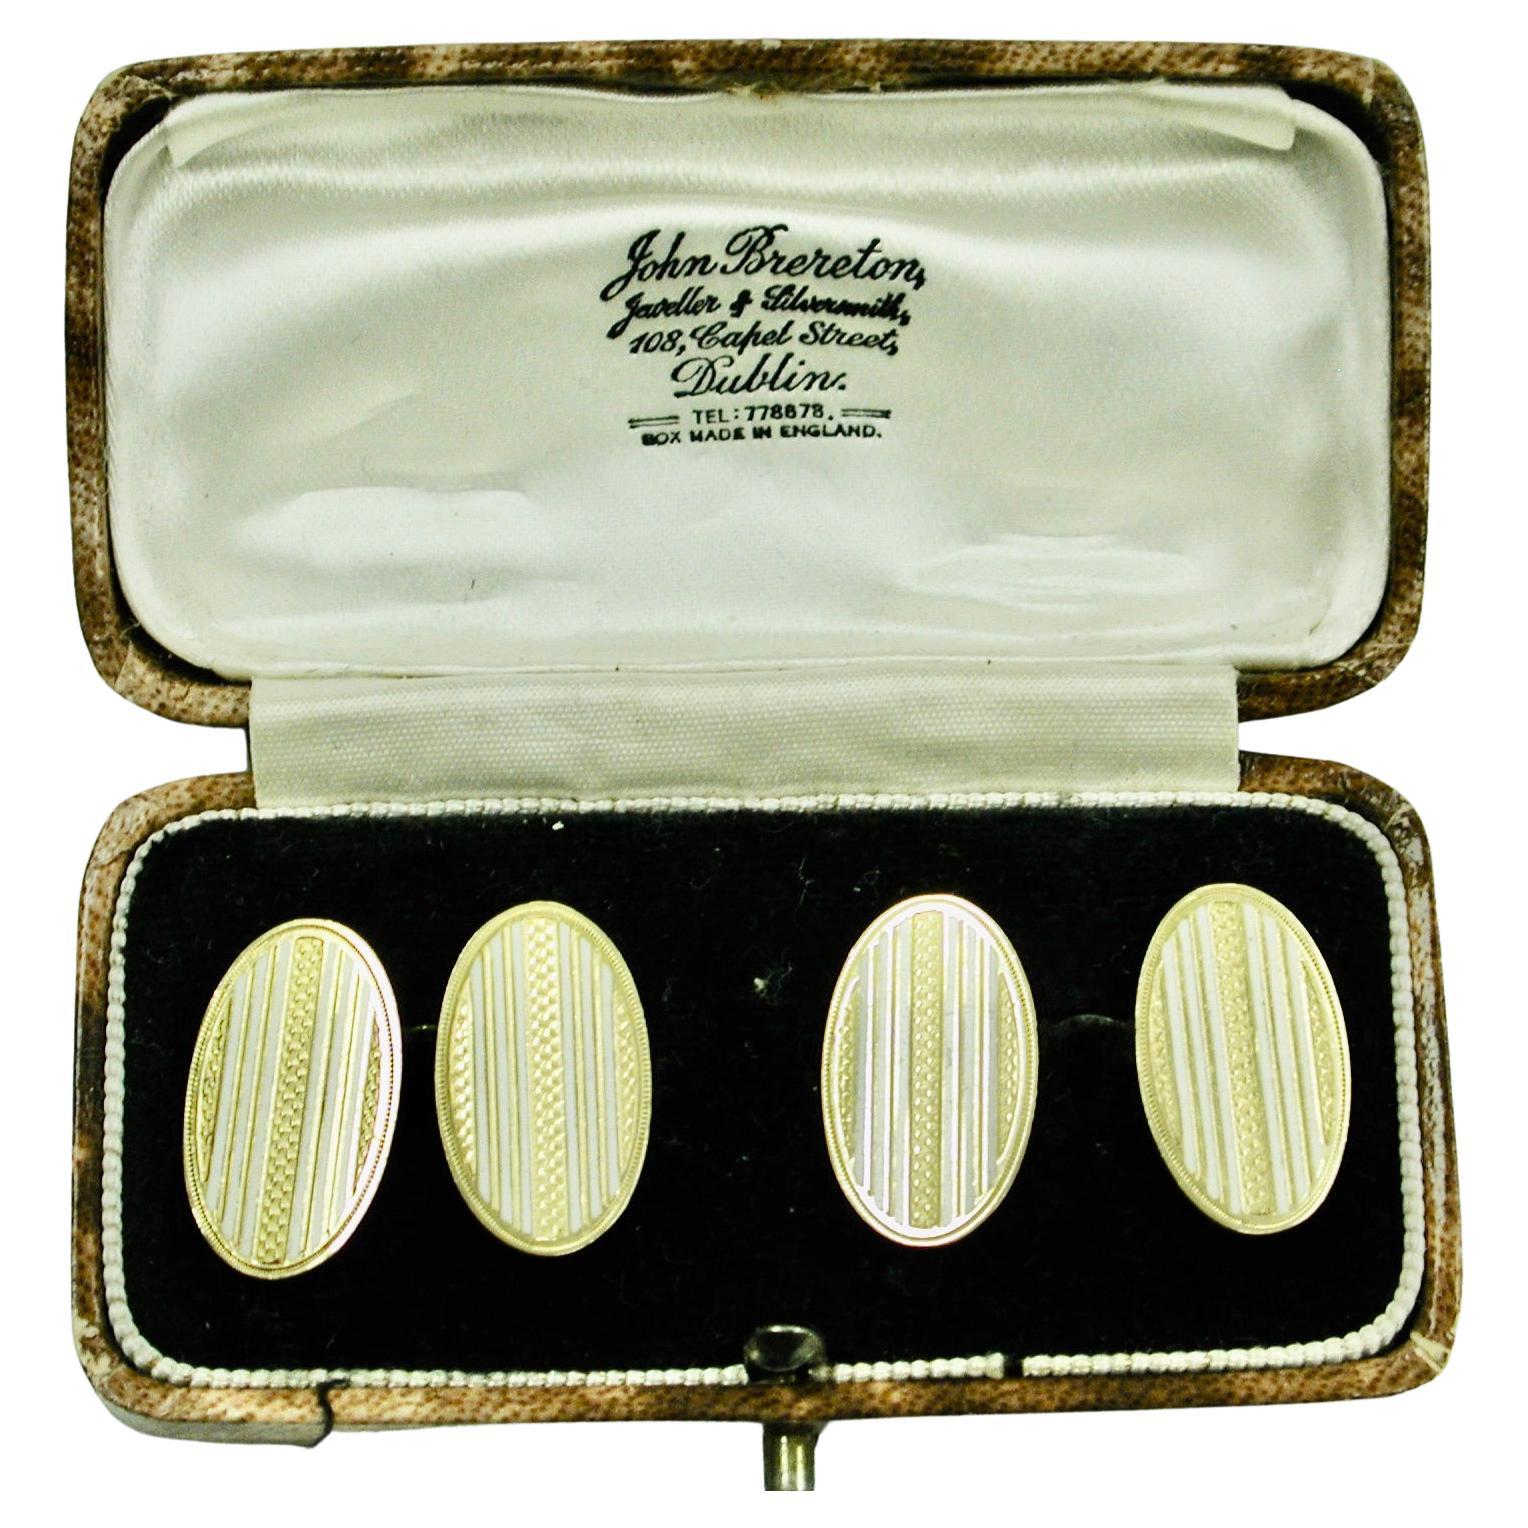 Pair Of 18ct Gold & White Enamel Engine Turned Cufflinks 1925 London
Heavy quality pair of cufflinks in very good order,made by Frederick Coulthurst.